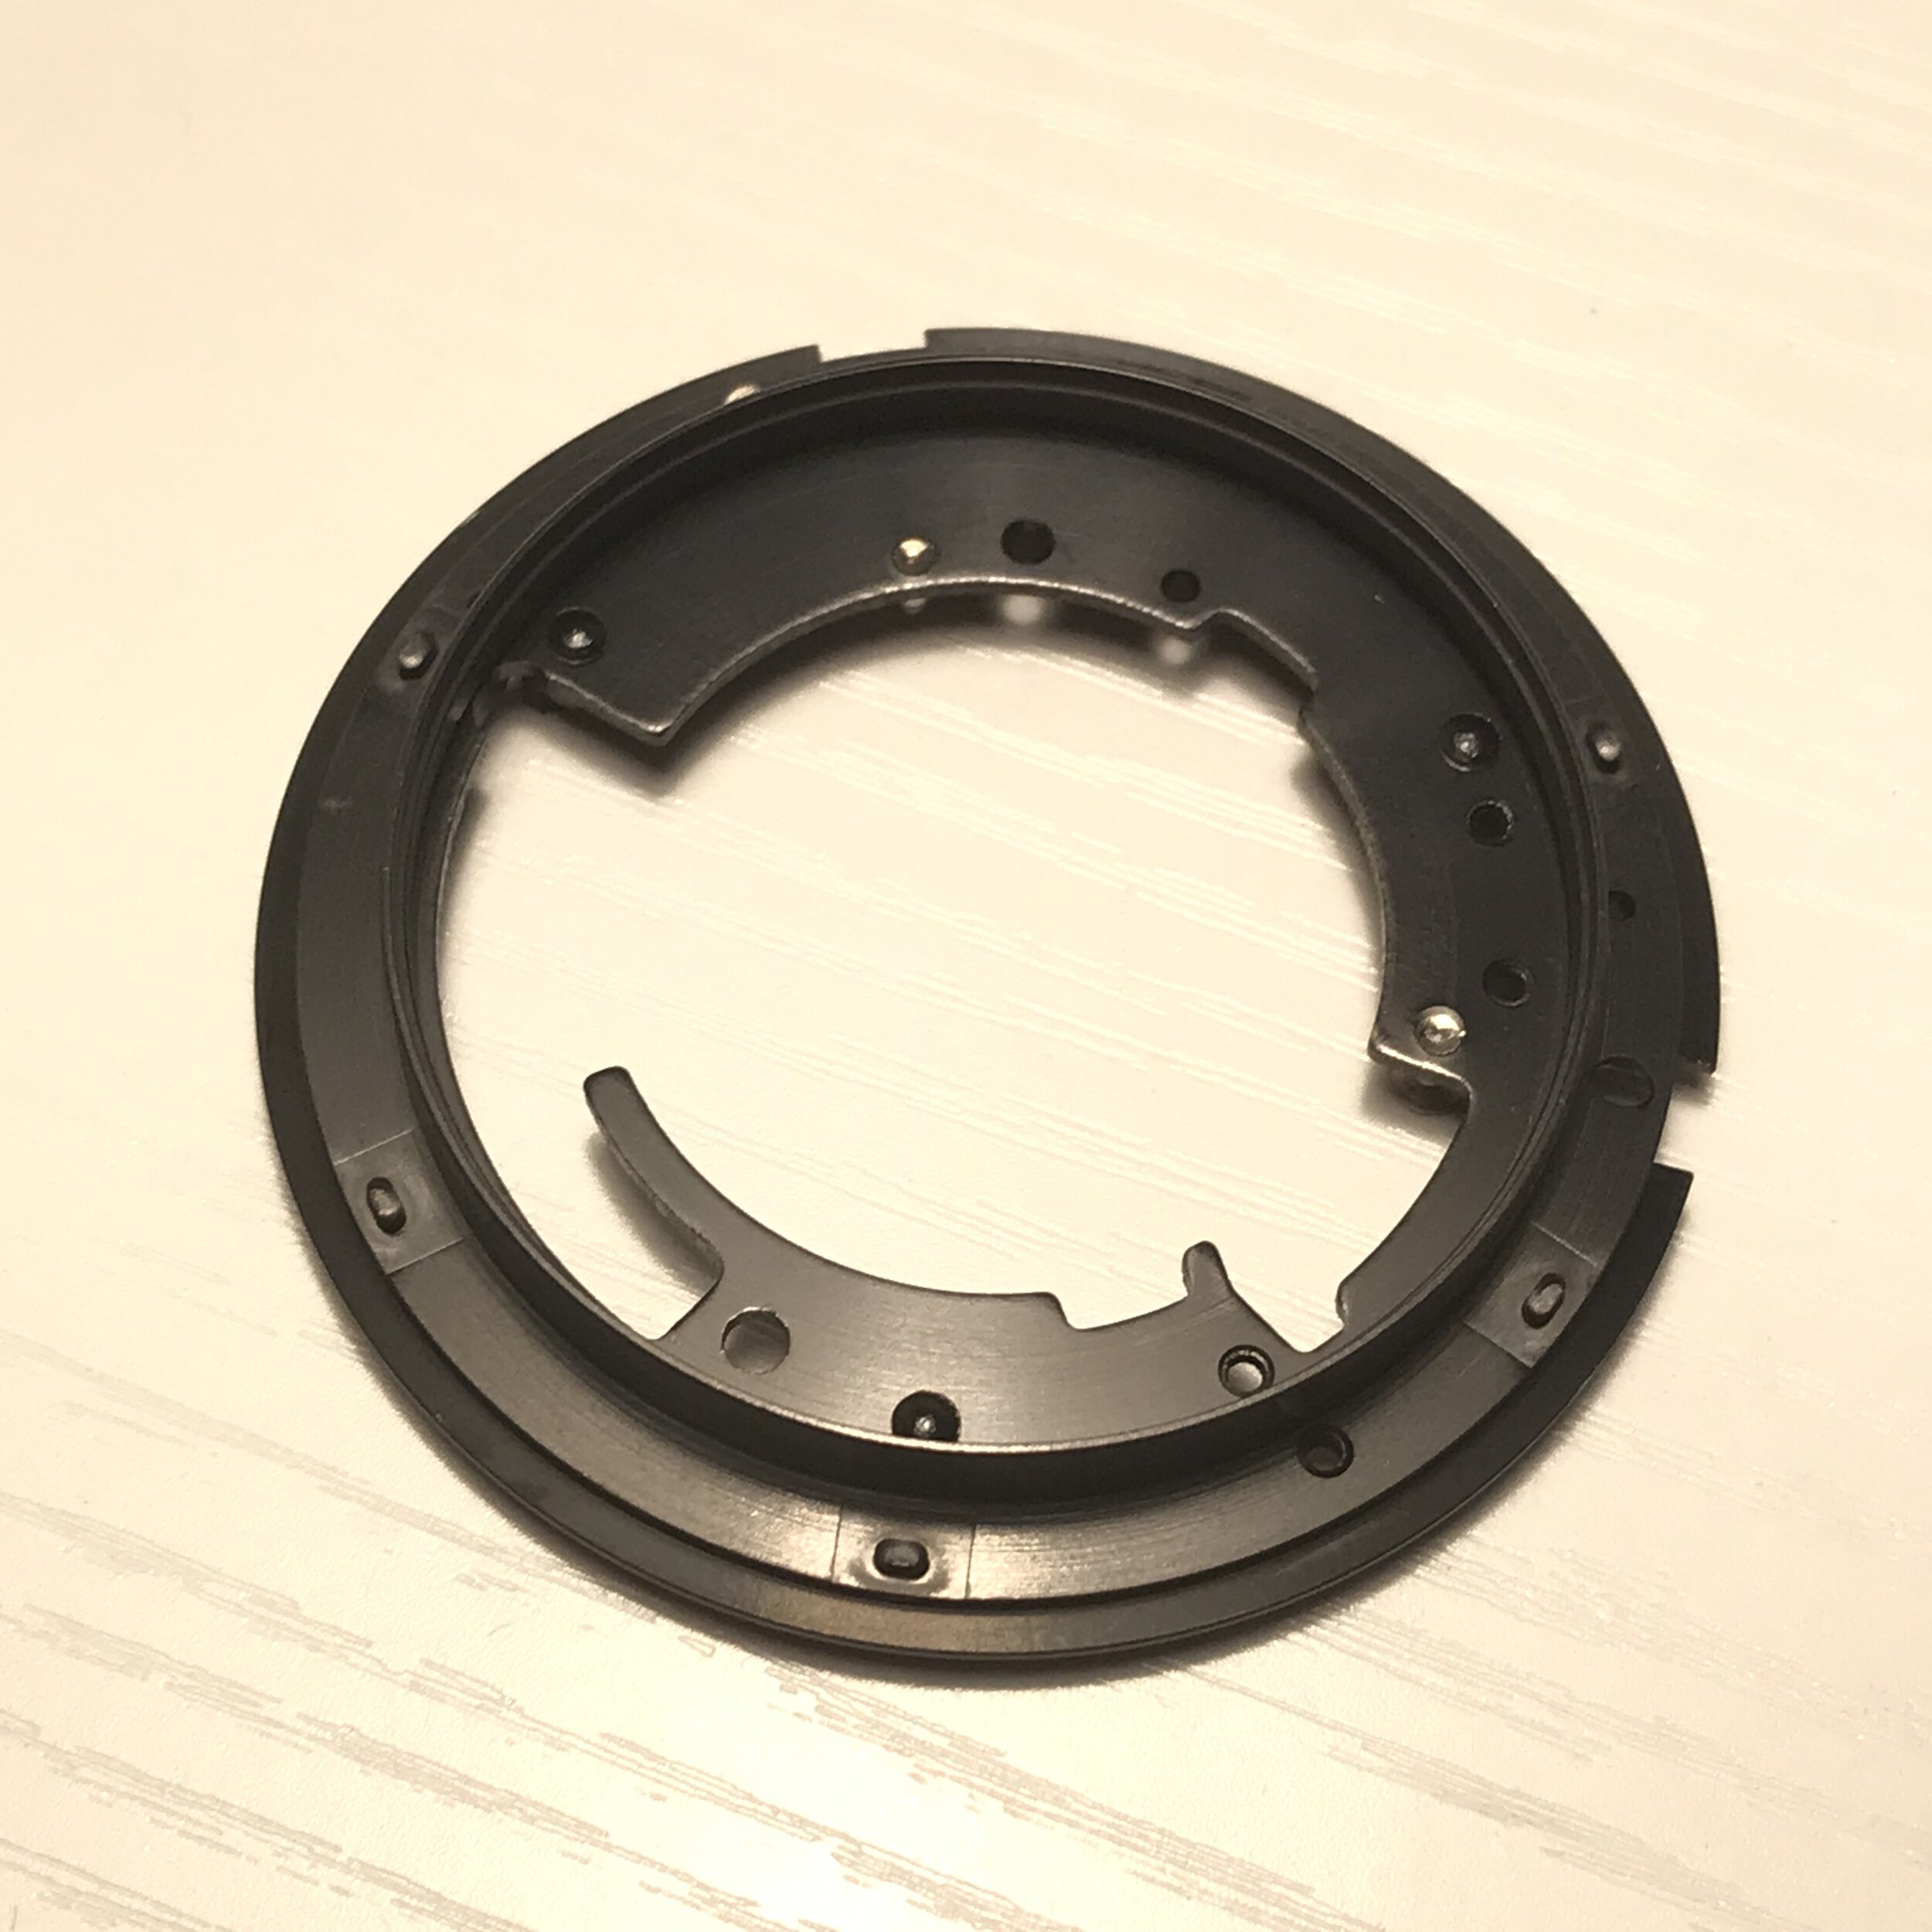 CANON Front Name Ring for FD 50mm f/1.8 Lens New OEM Part CA2-0629-000 